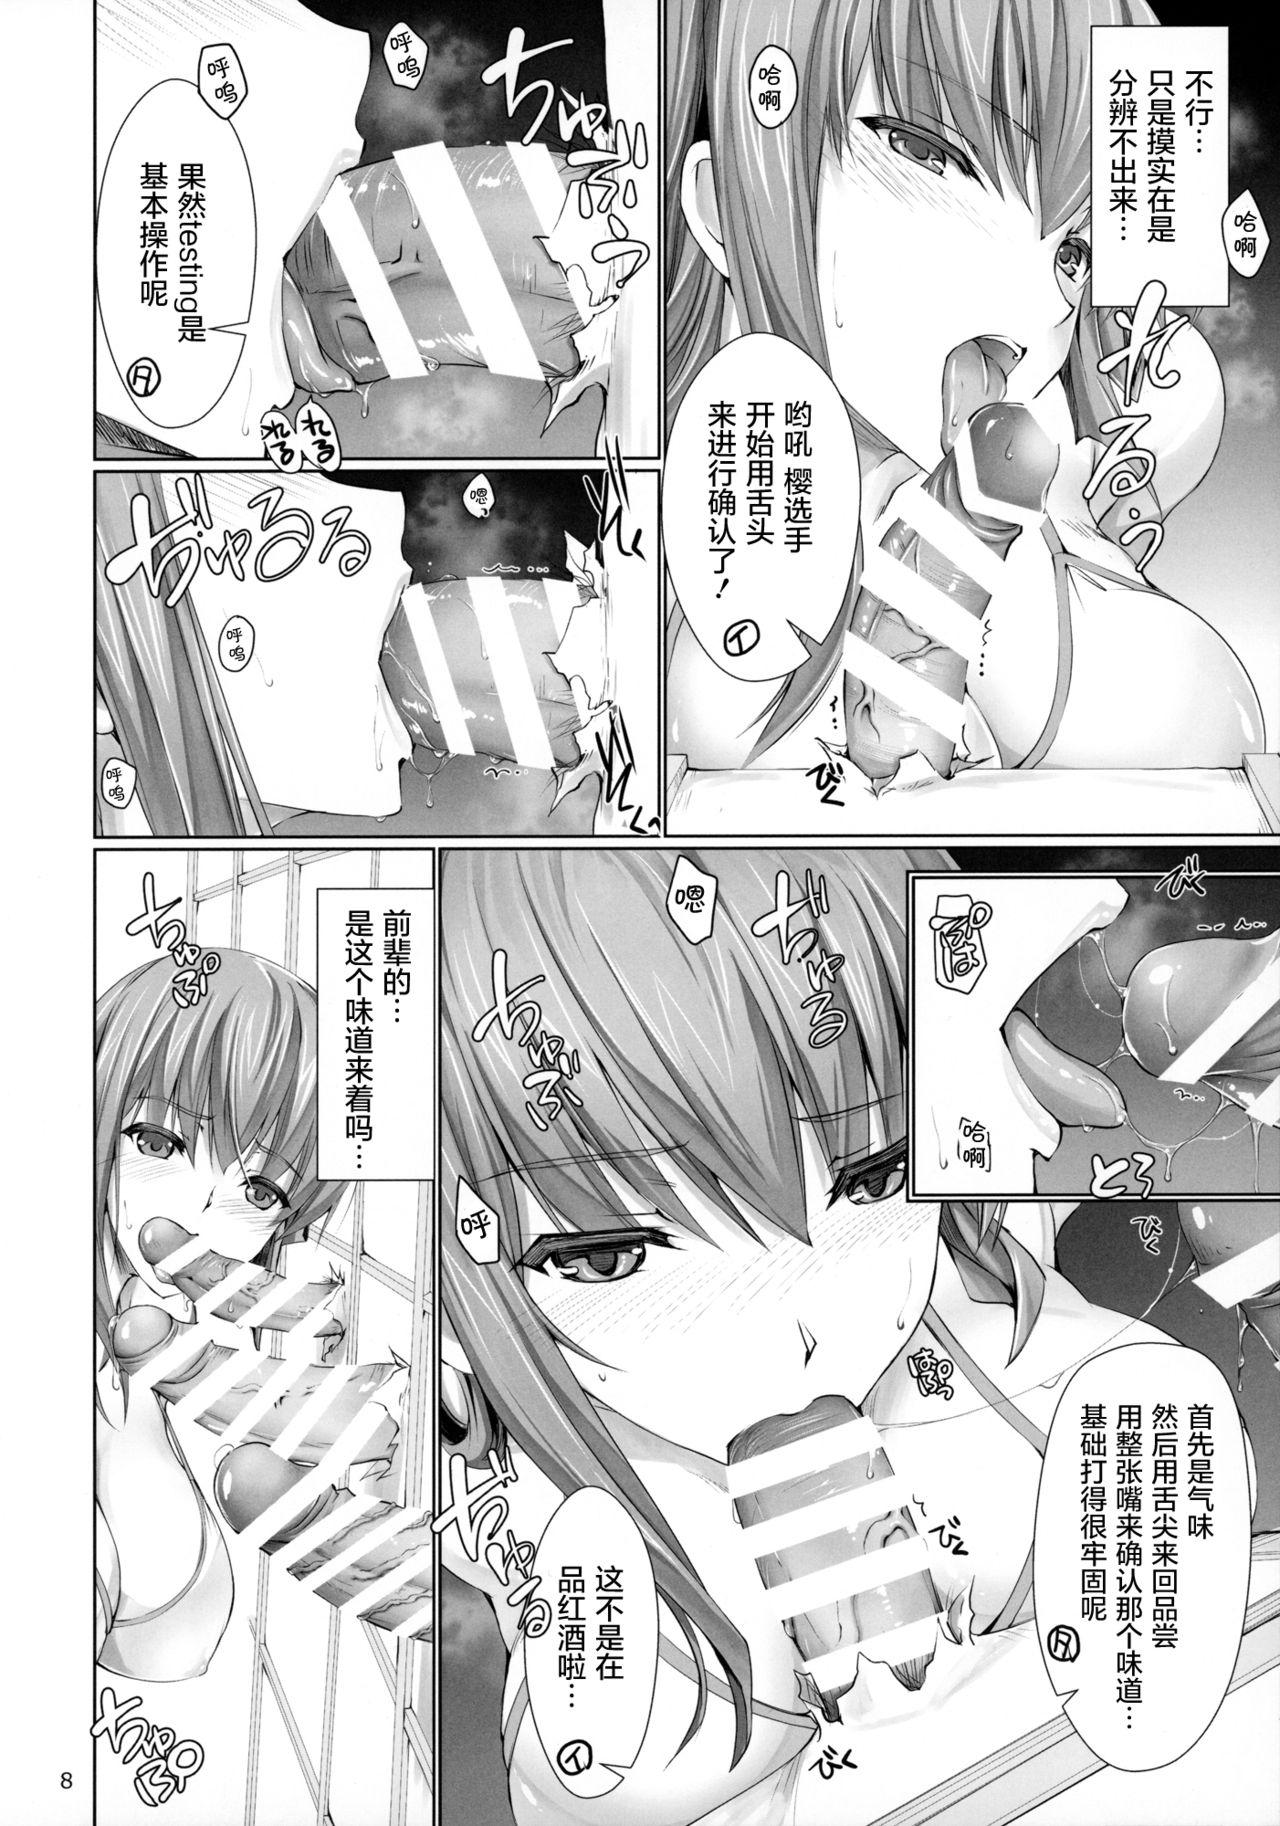 Gay Military I miss you. - Fate stay night Amateur Sex - Page 8